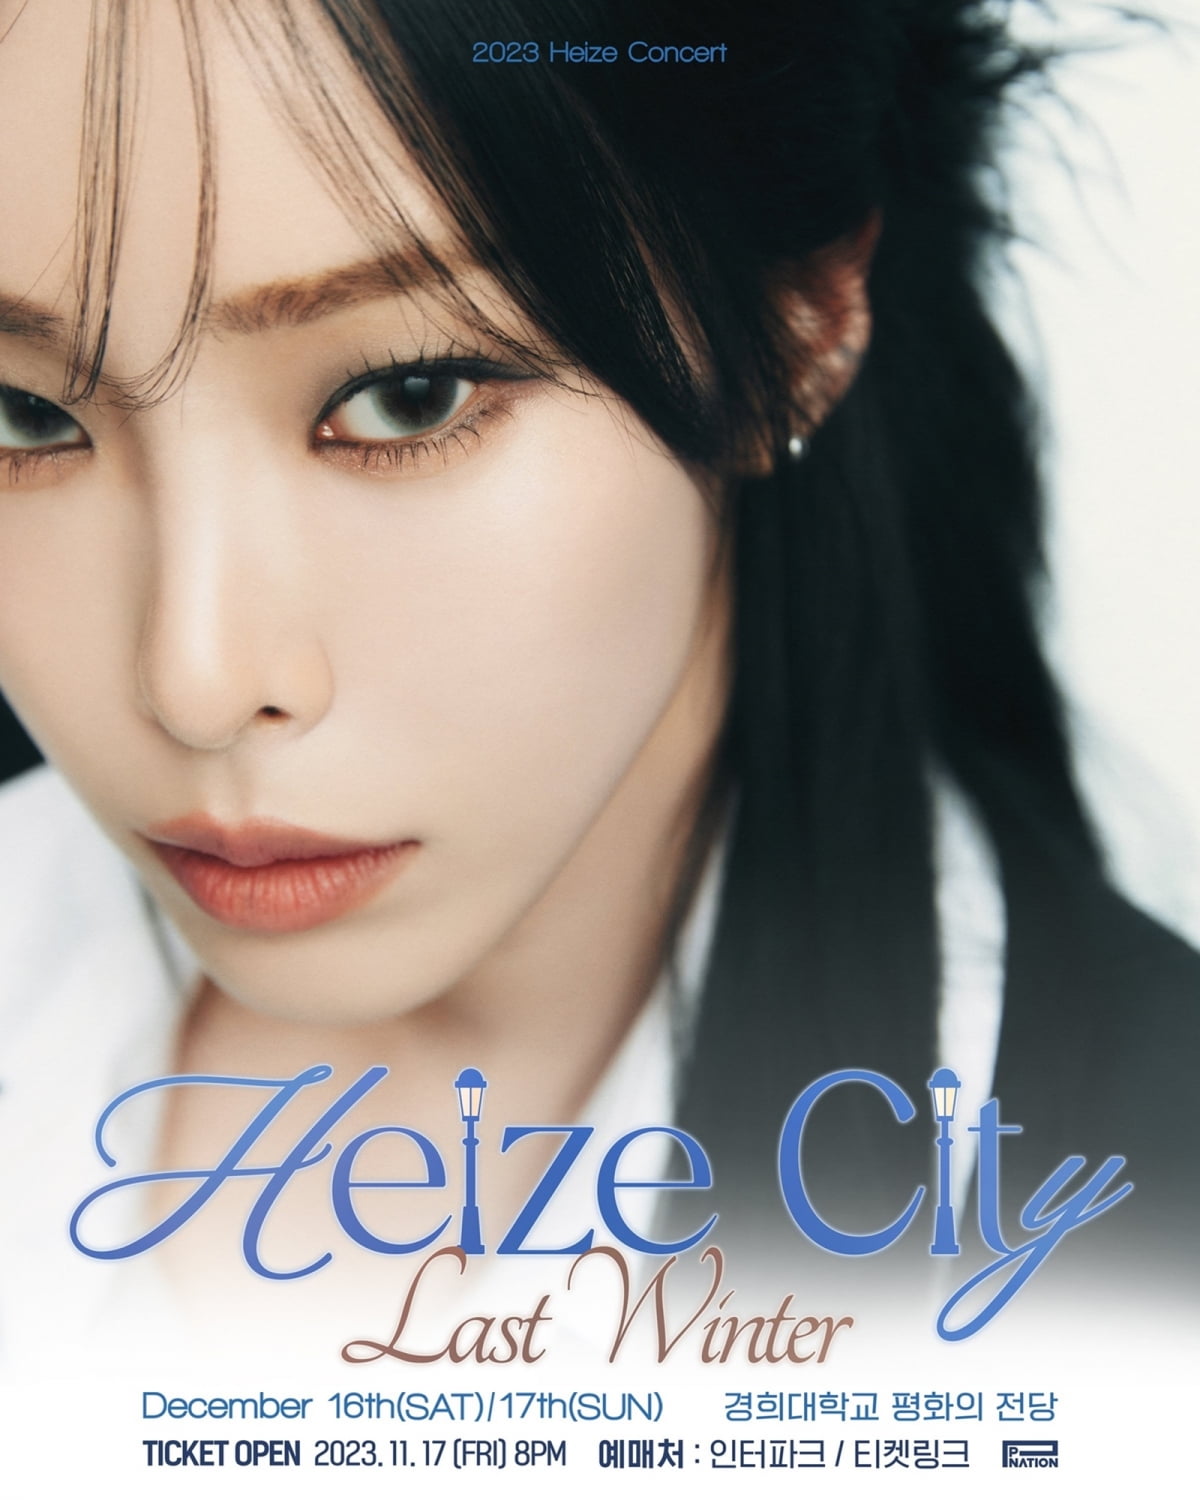 Heize begins booking tickets for ‘2023 Heize City Last Winter’ concert